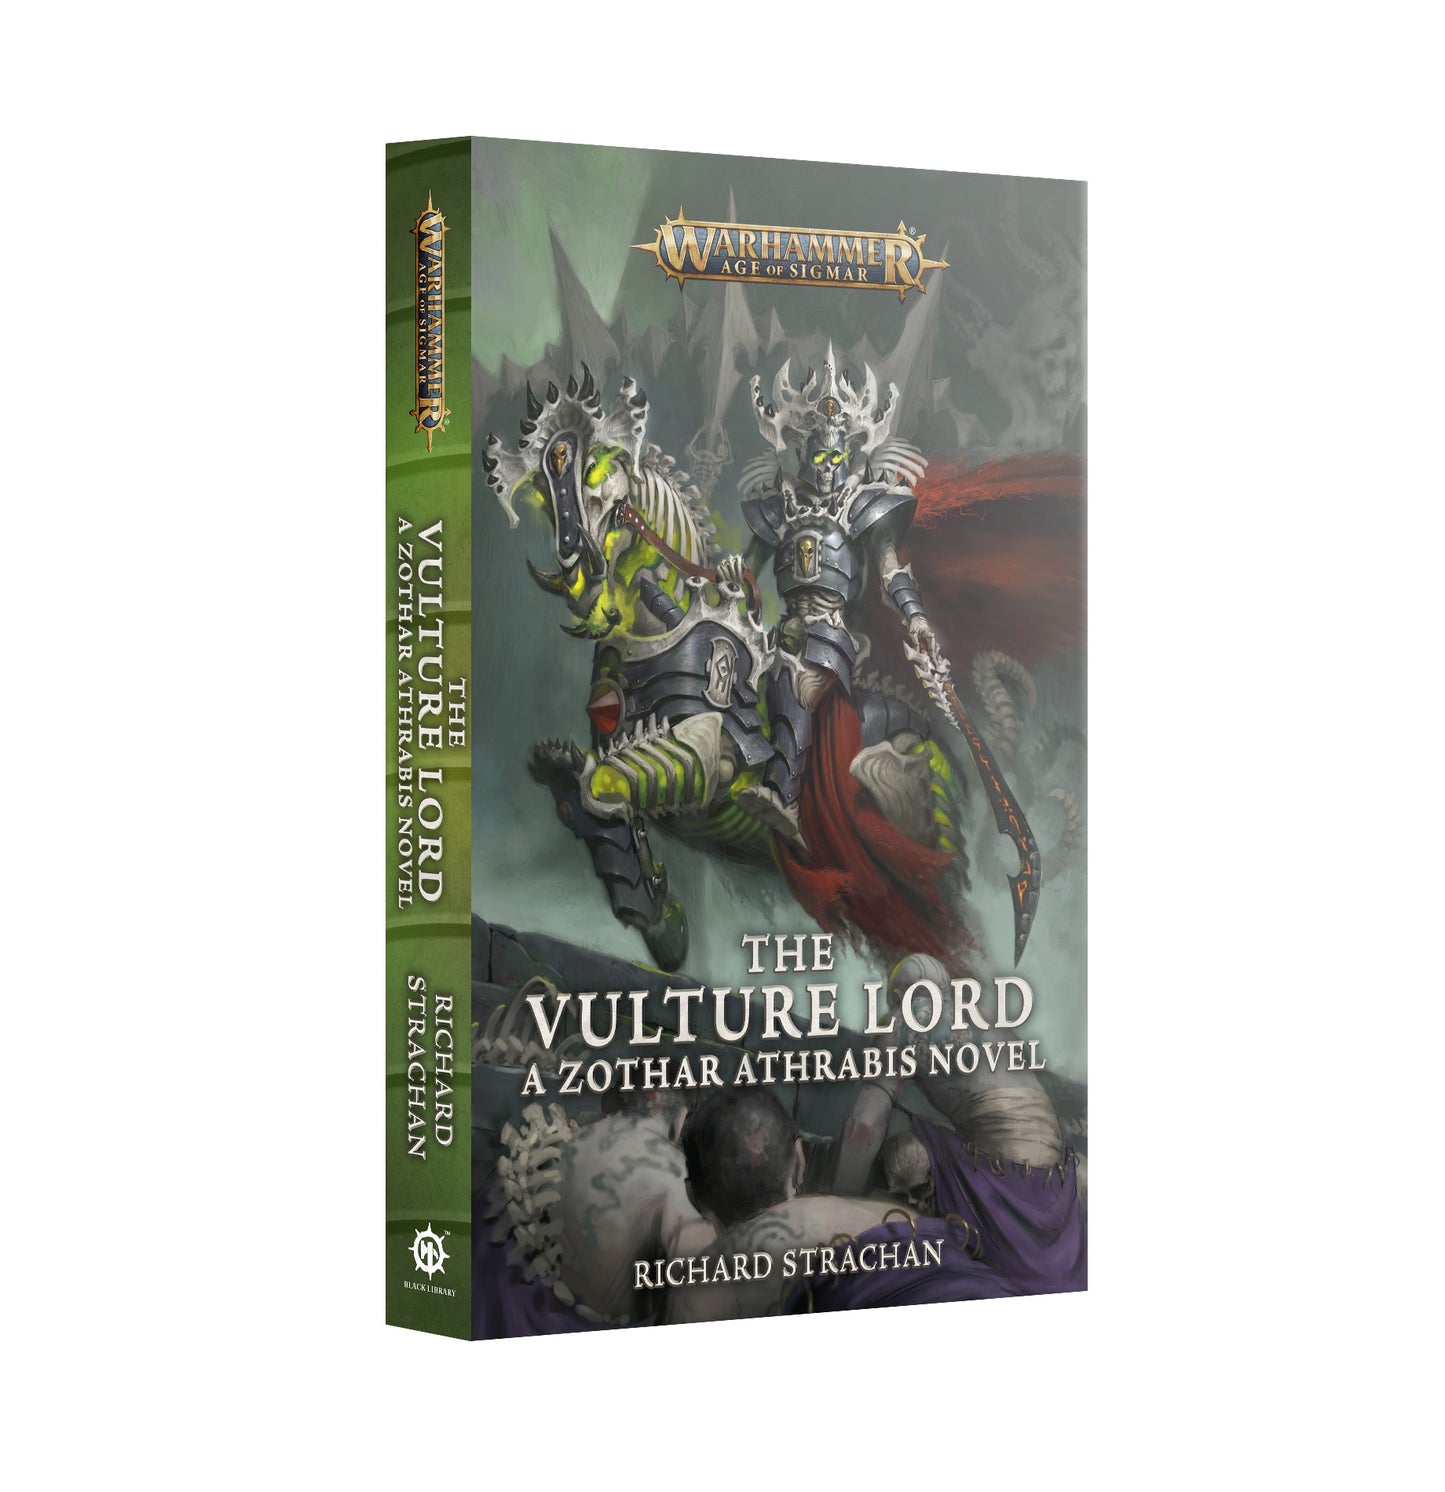 AGE OF SIGMAR THE VULTURE LORD BY RICHARD STRACHAN